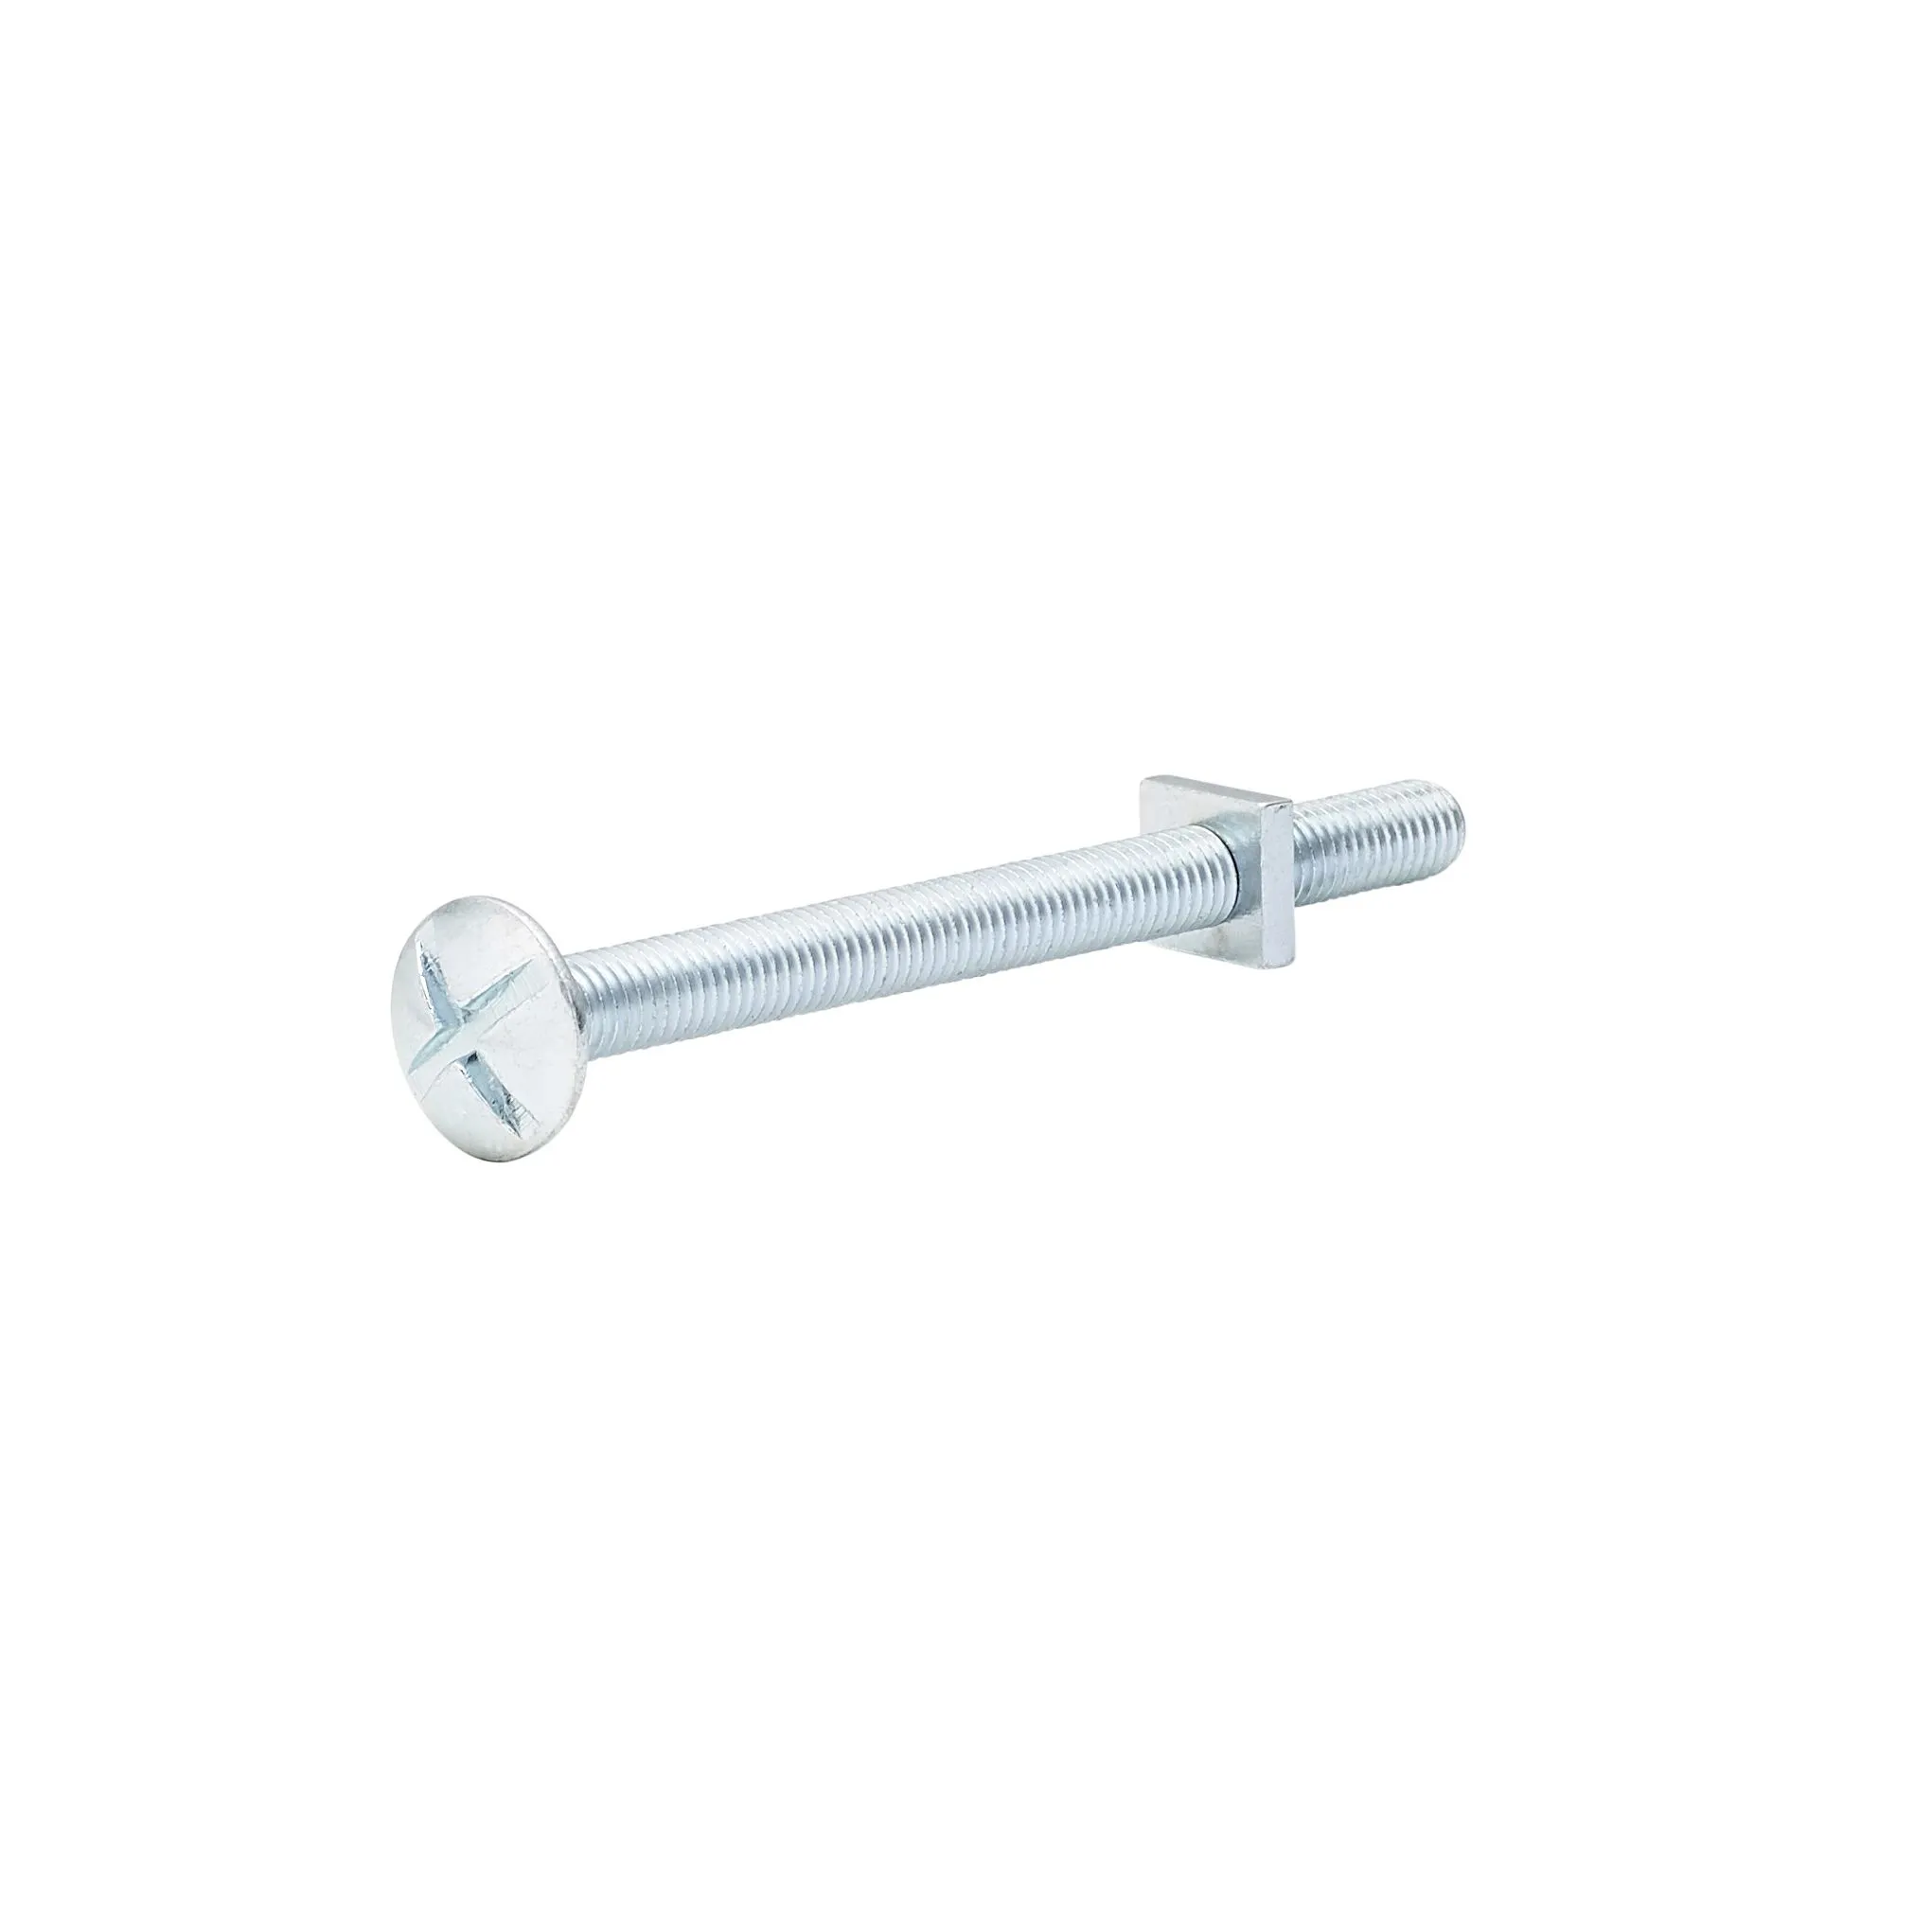 M8 Roofing bolt & nut (L)100mm, Pack of 10